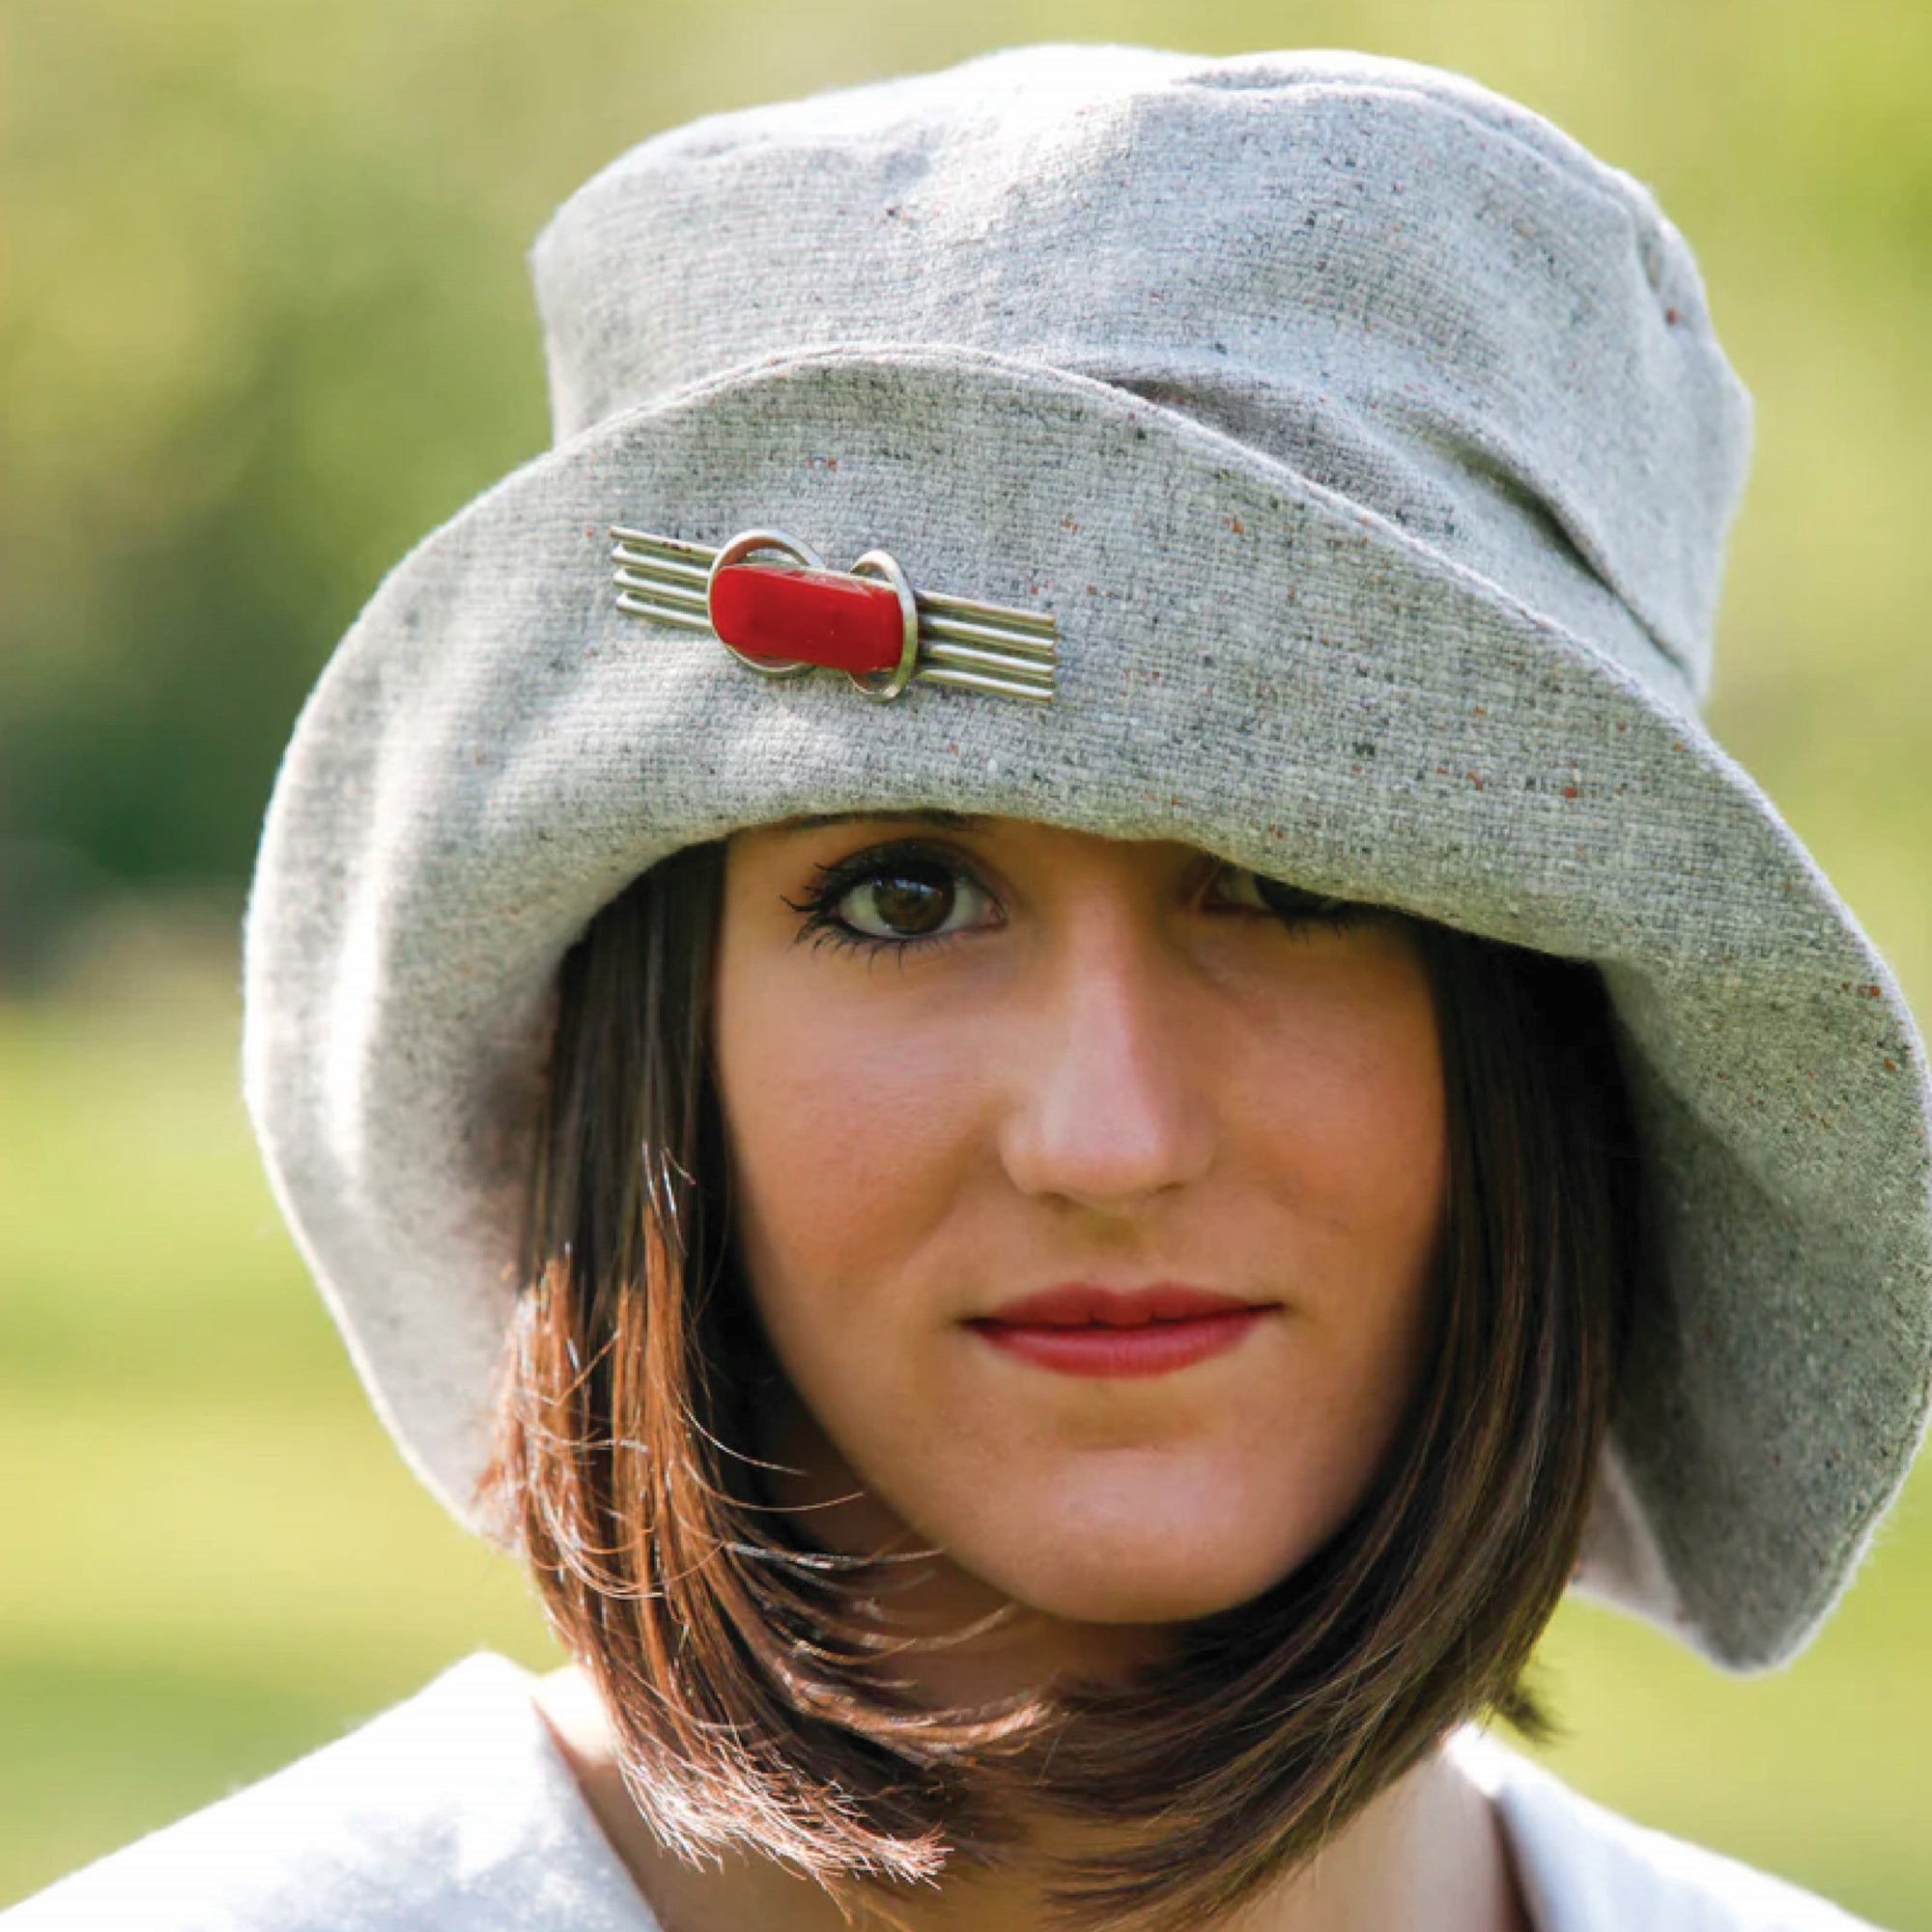 Woman's face and head in a grey slouchy hat with a red brooch.